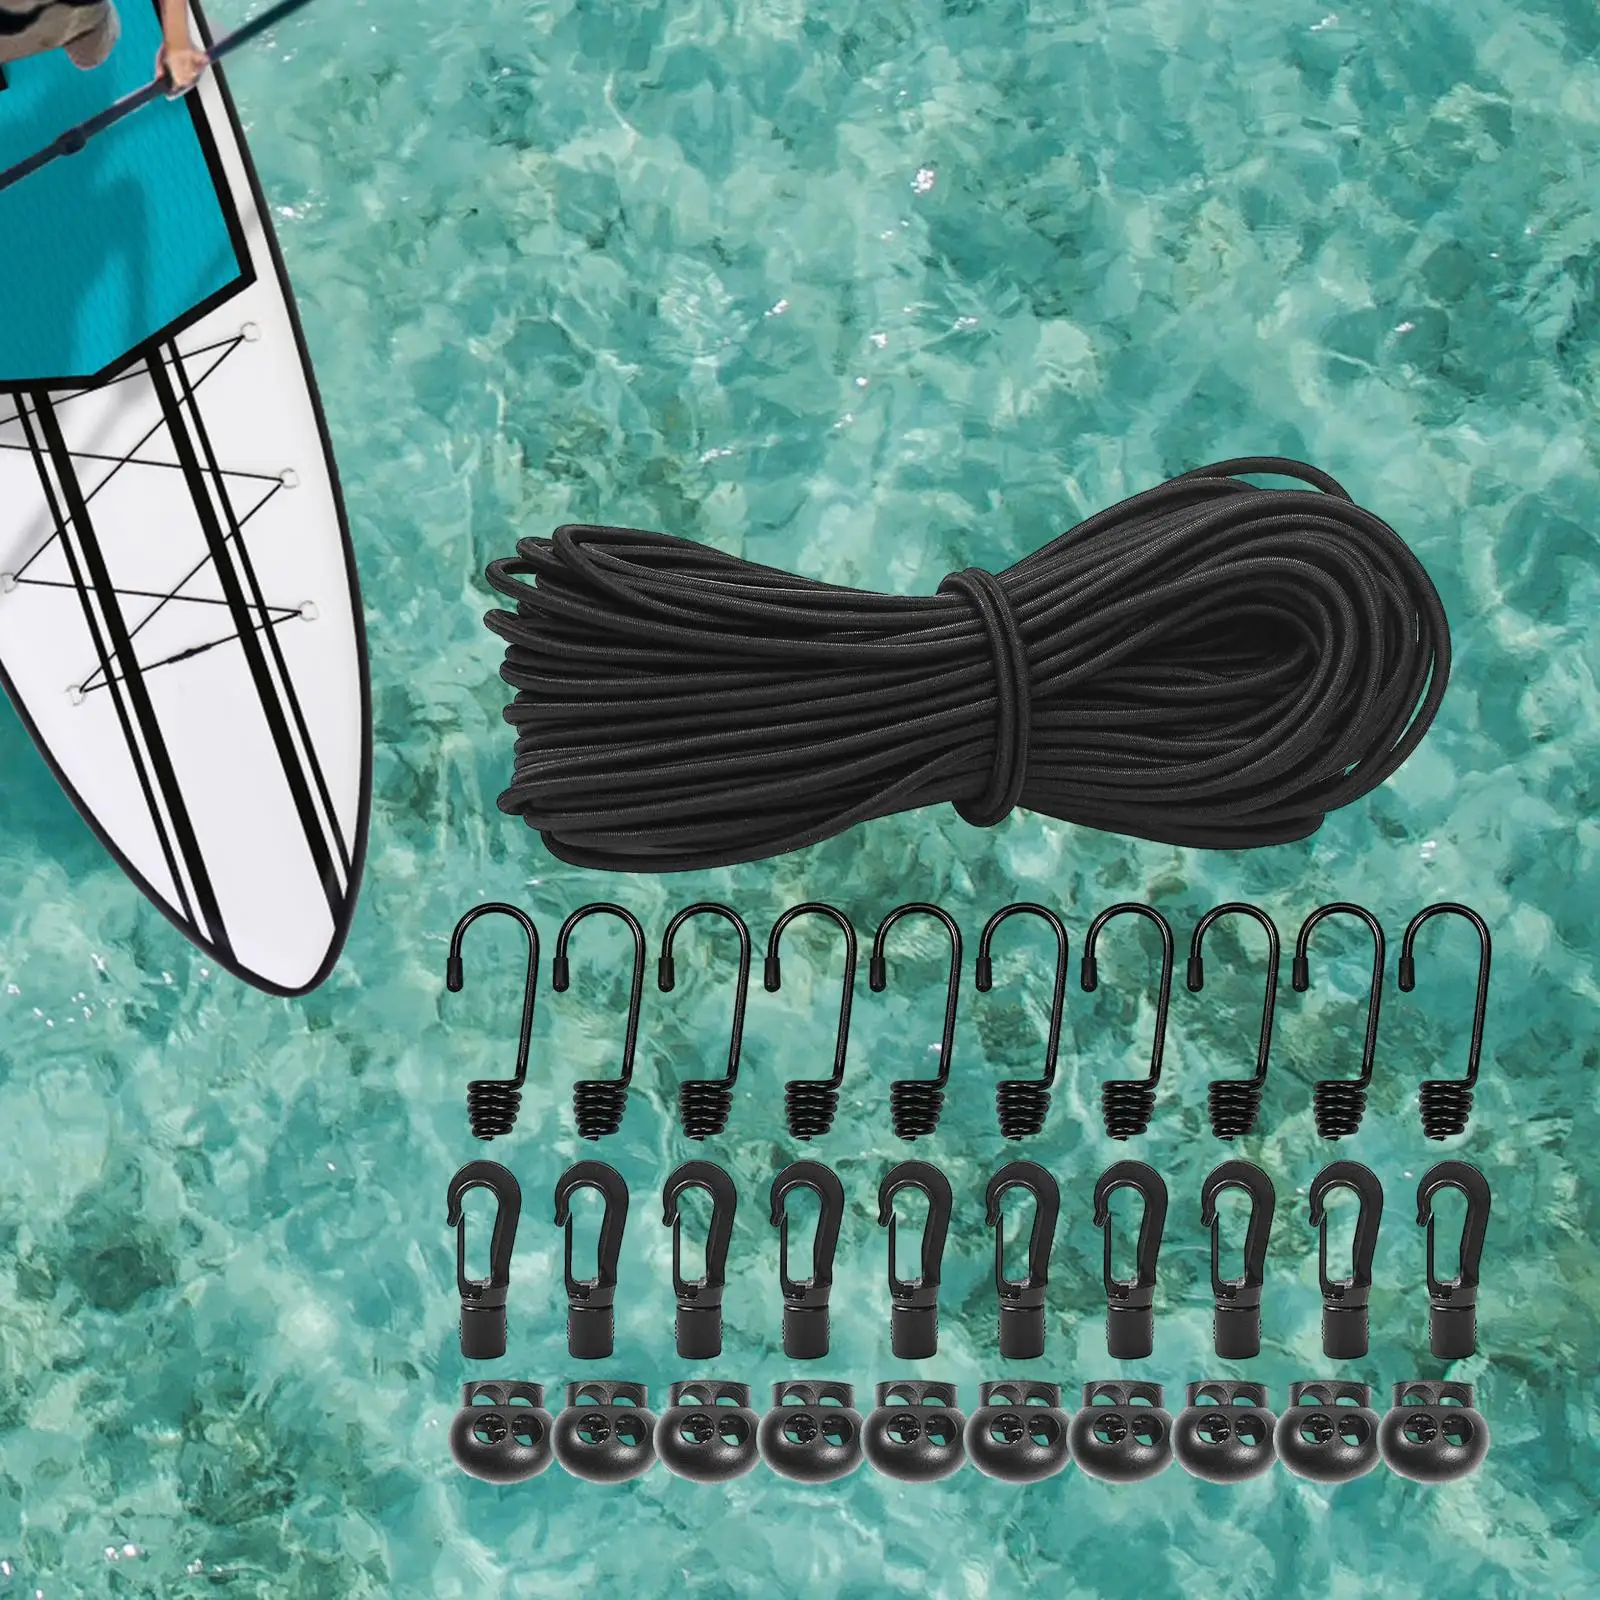 Elastic Bungee Shock Cord with Hooks Kayak Bungee Kit for Outdoor Activities